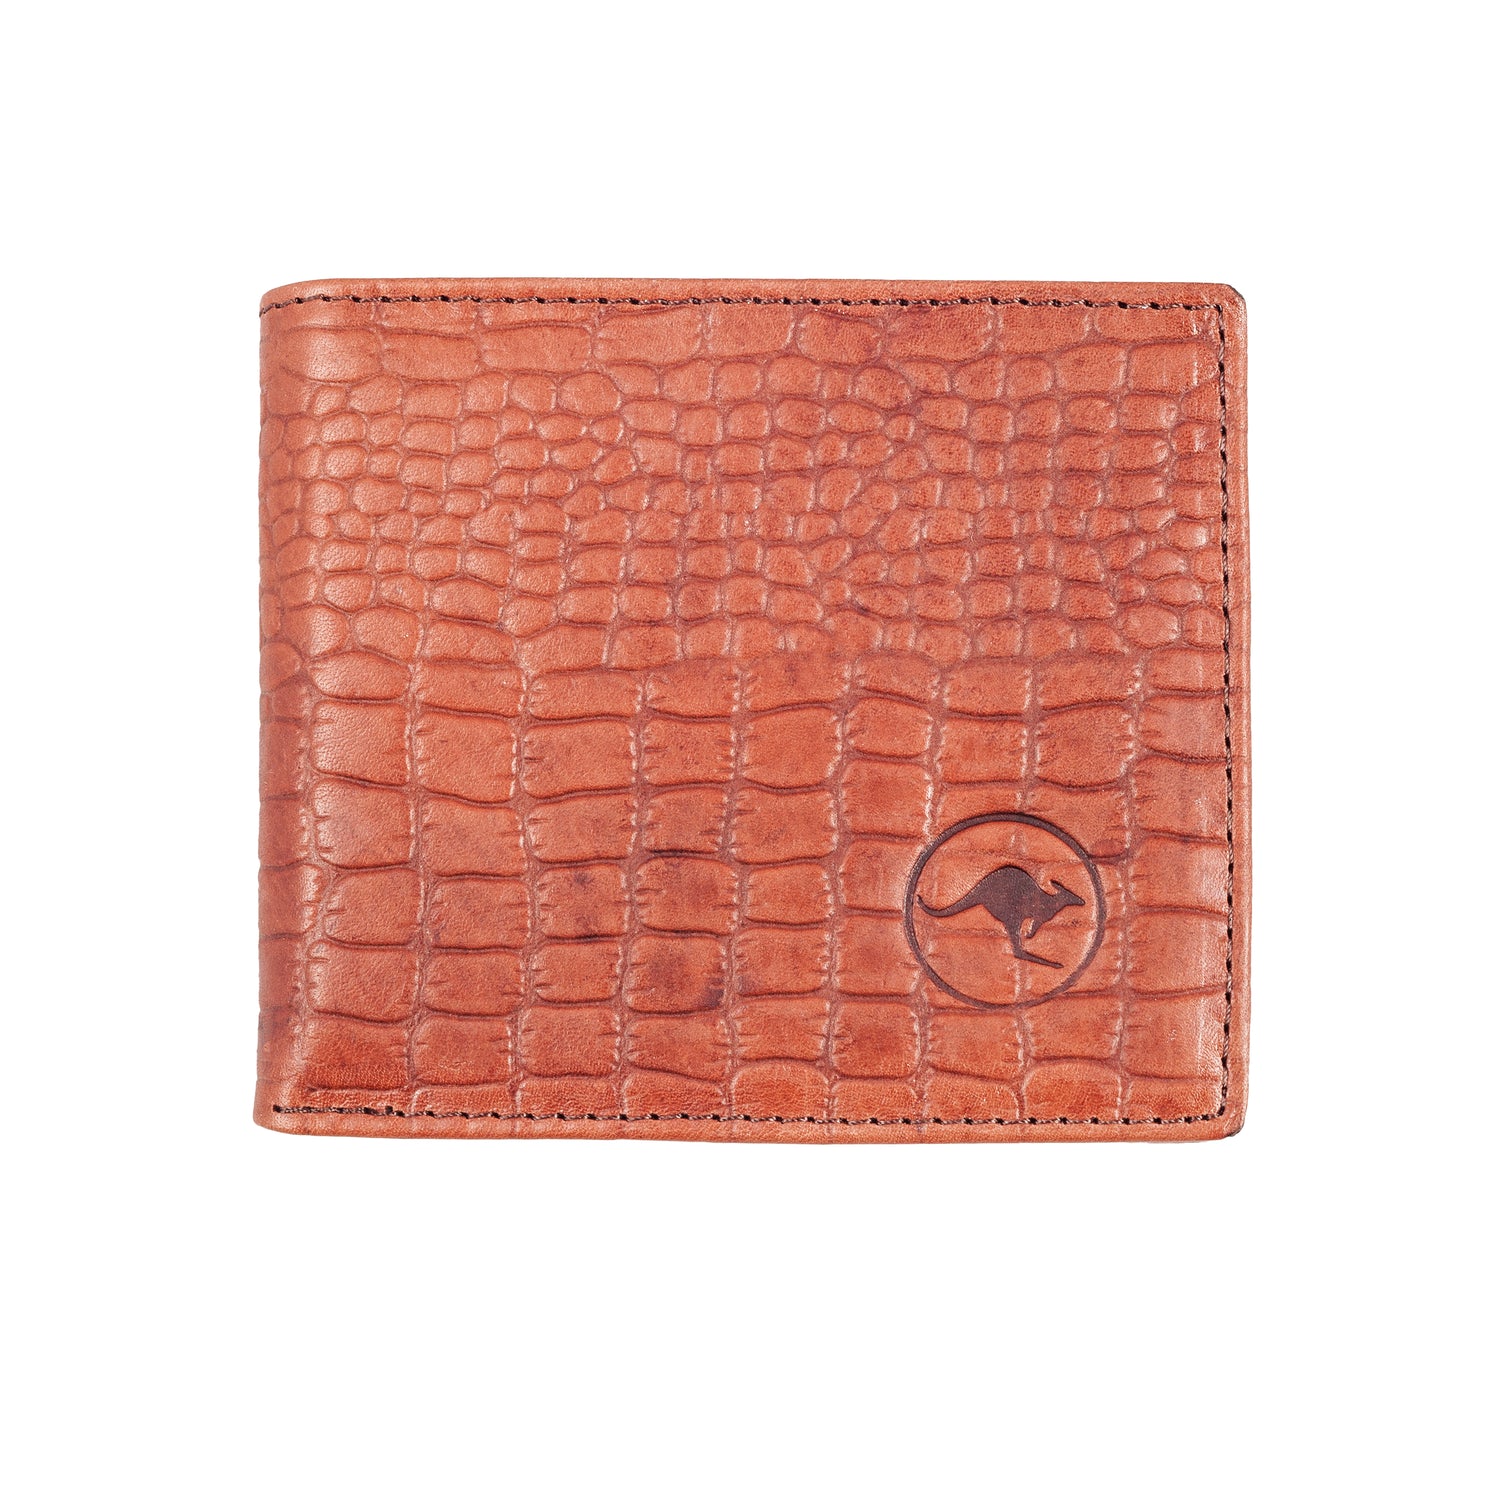 Single Fold Tan Classic Leather Wallet, embossed crocodile print. Available in Single or Double Fold styles. Real deal, tough kangaroo leather, slim design for any pocket.